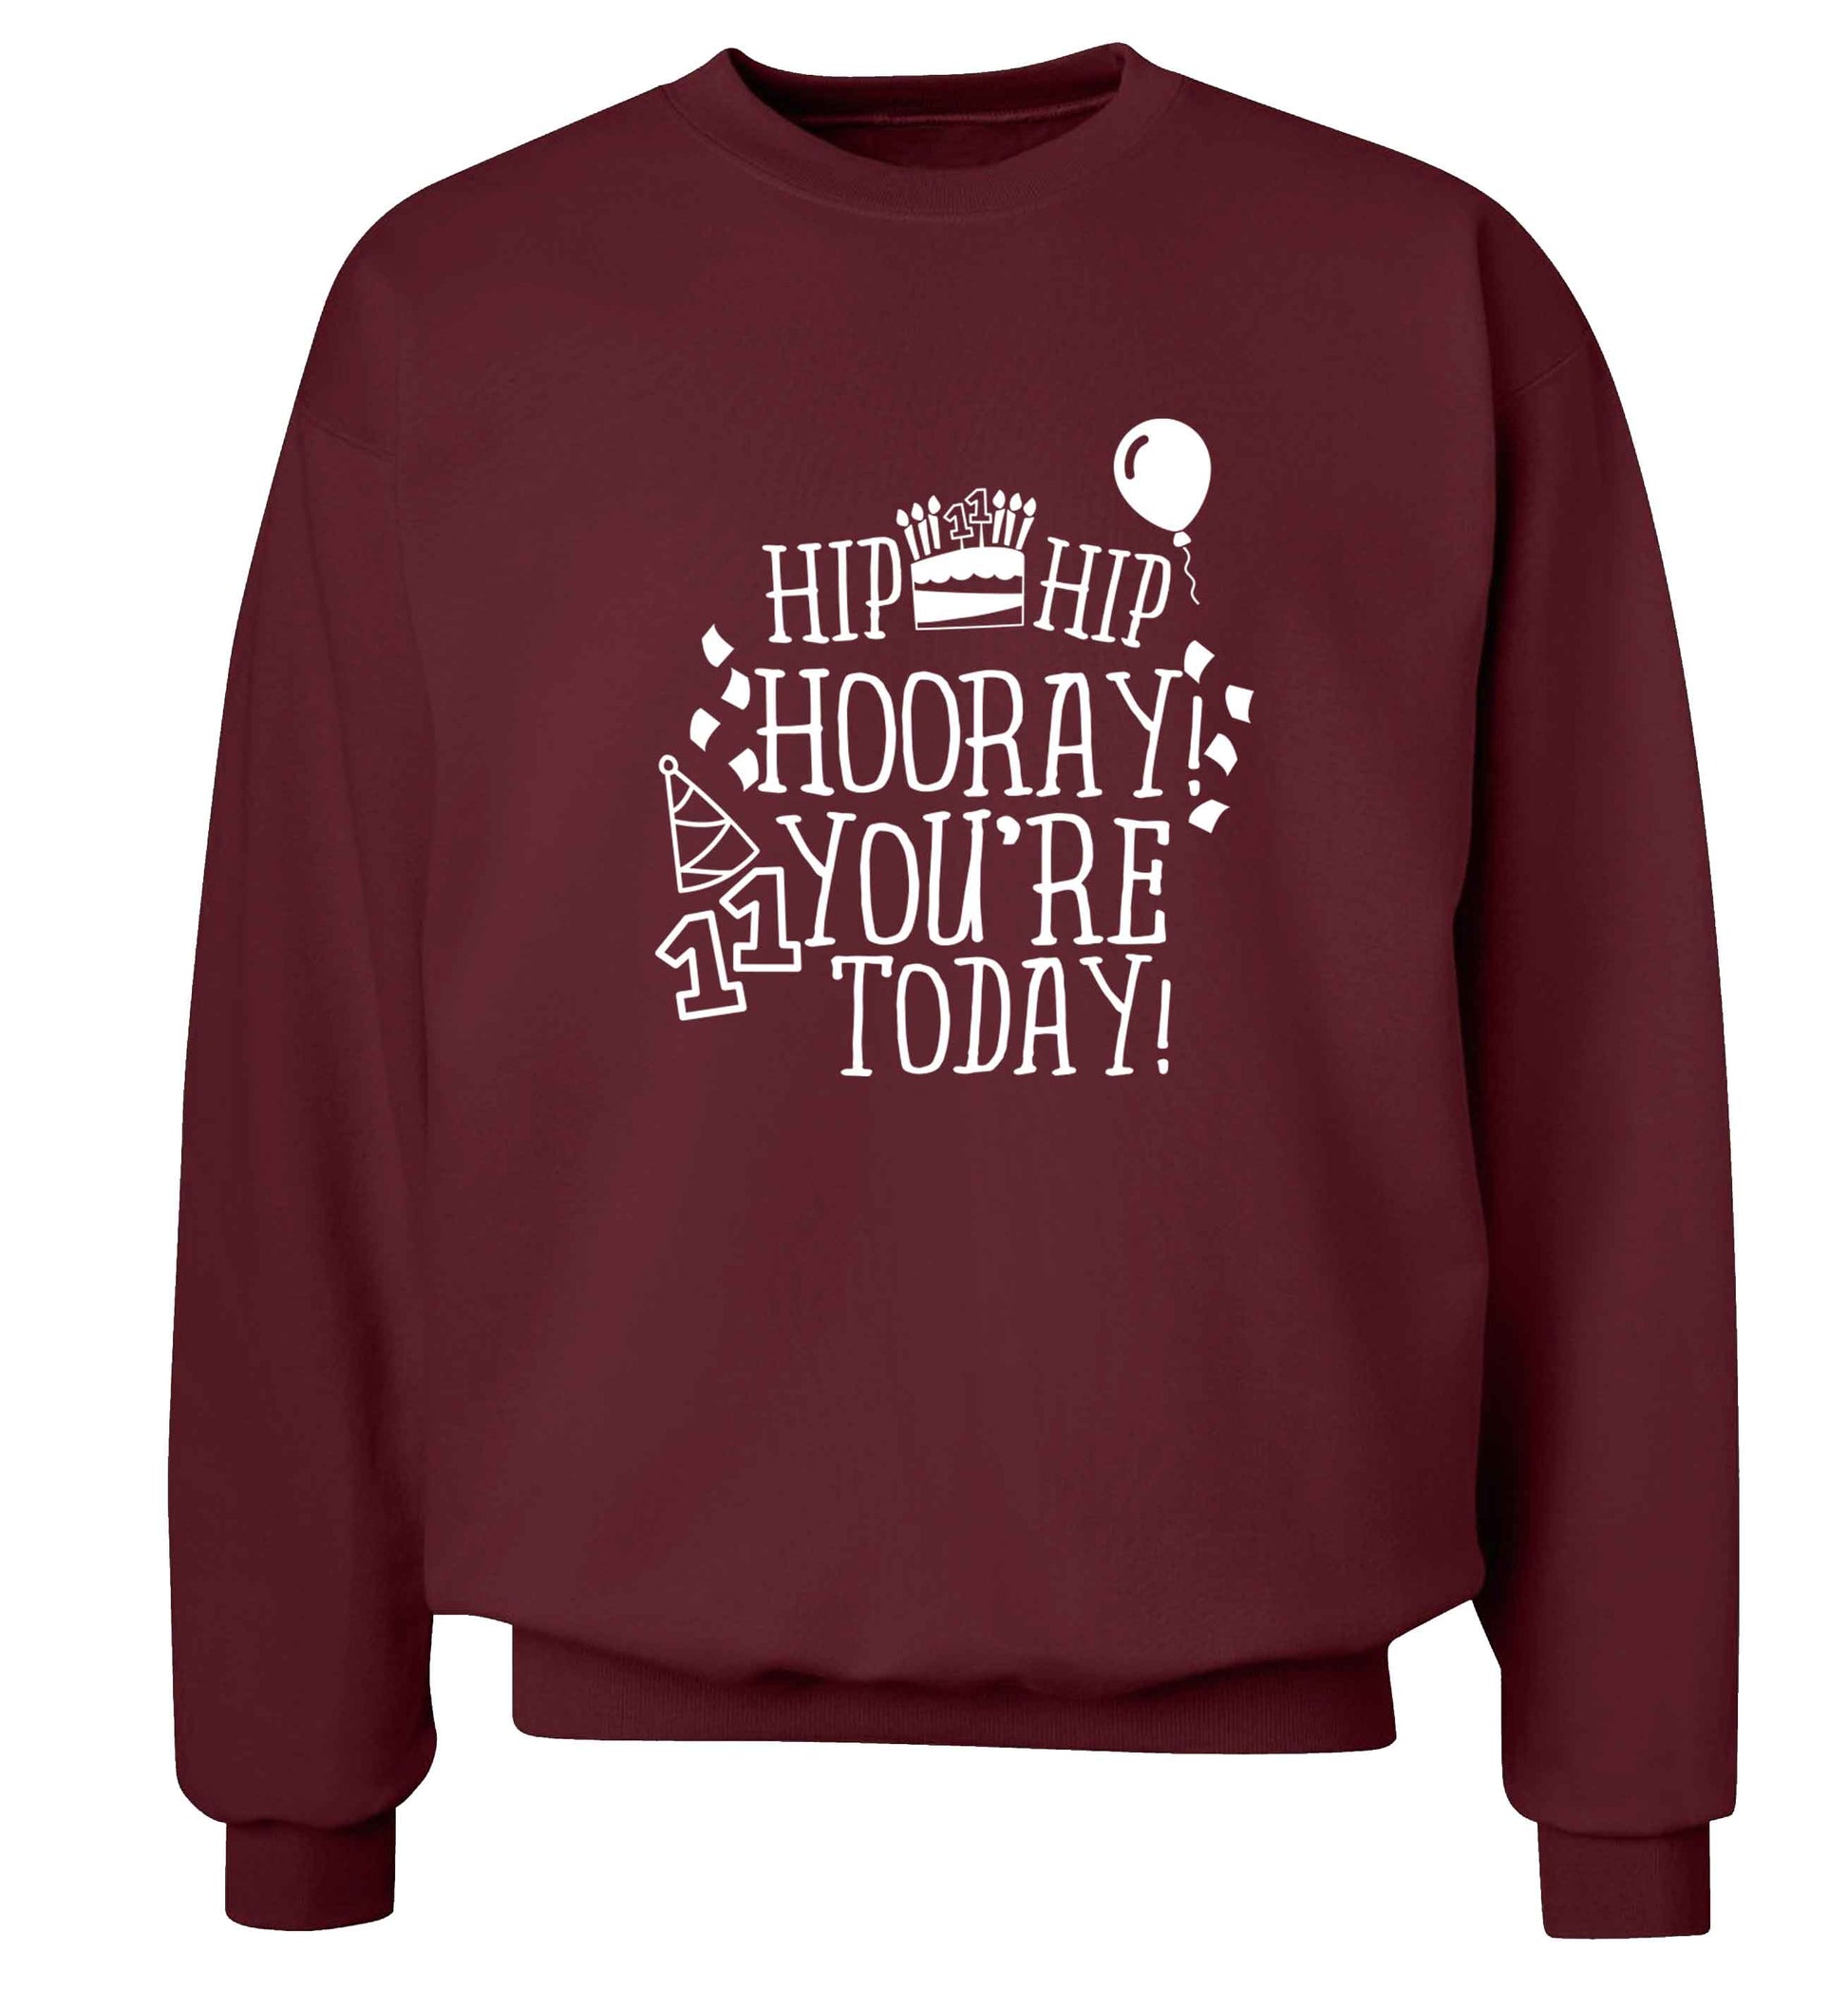 Hip hip hooray I you're eleven today! adult's unisex maroon sweater 2XL